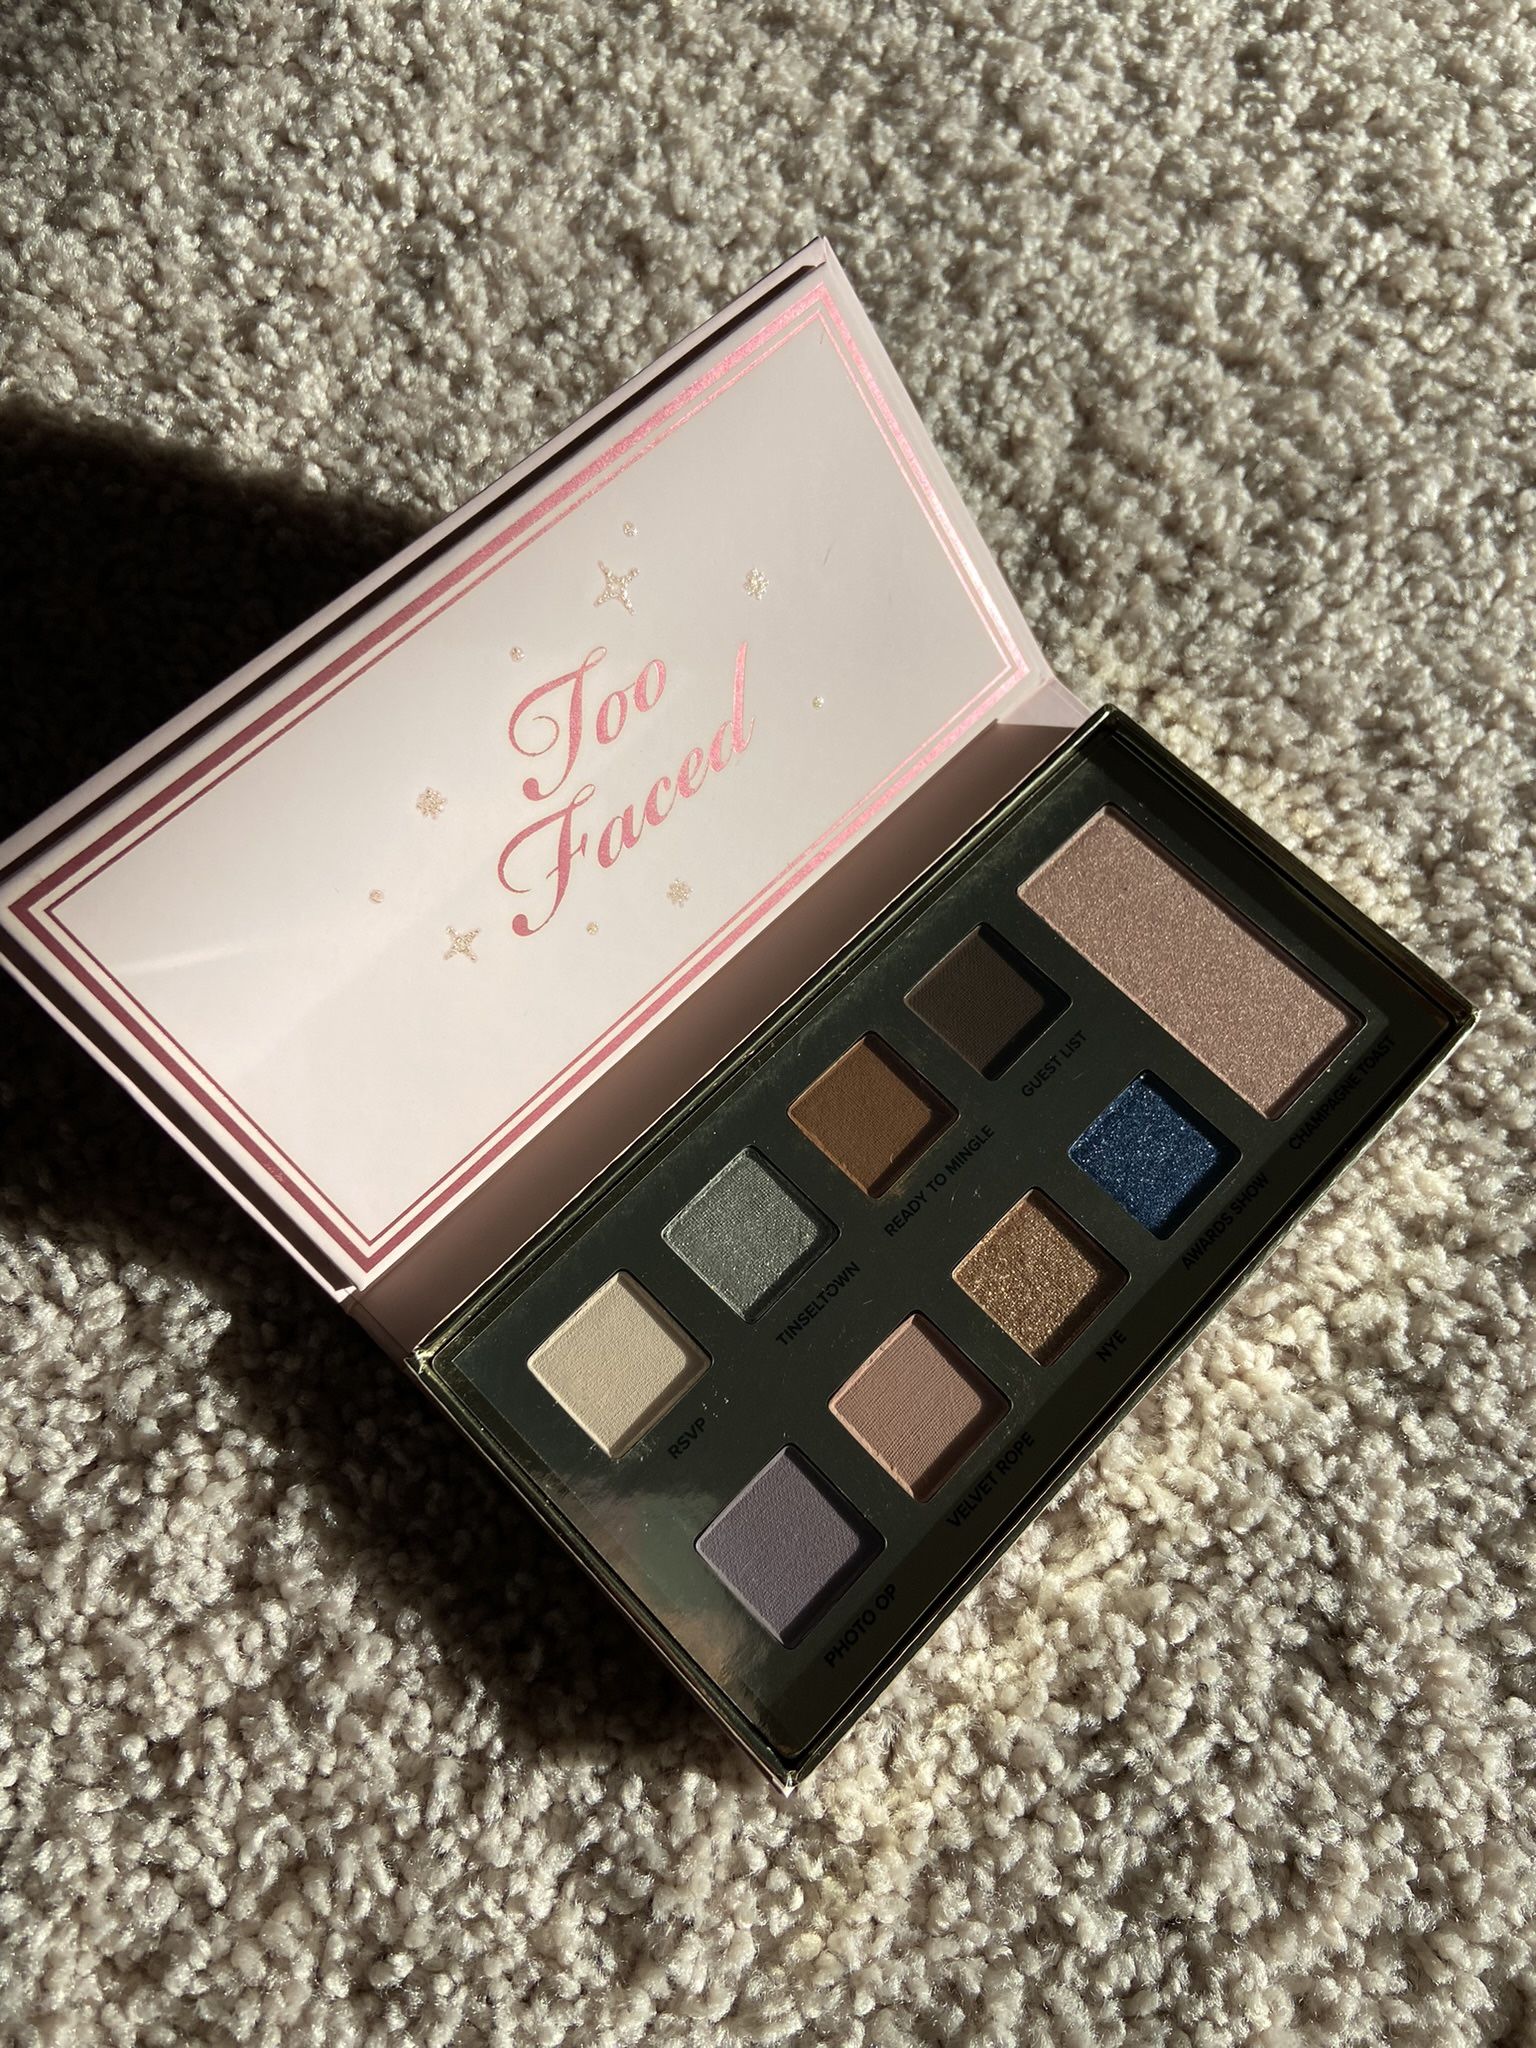 Too faced pop the cork palette